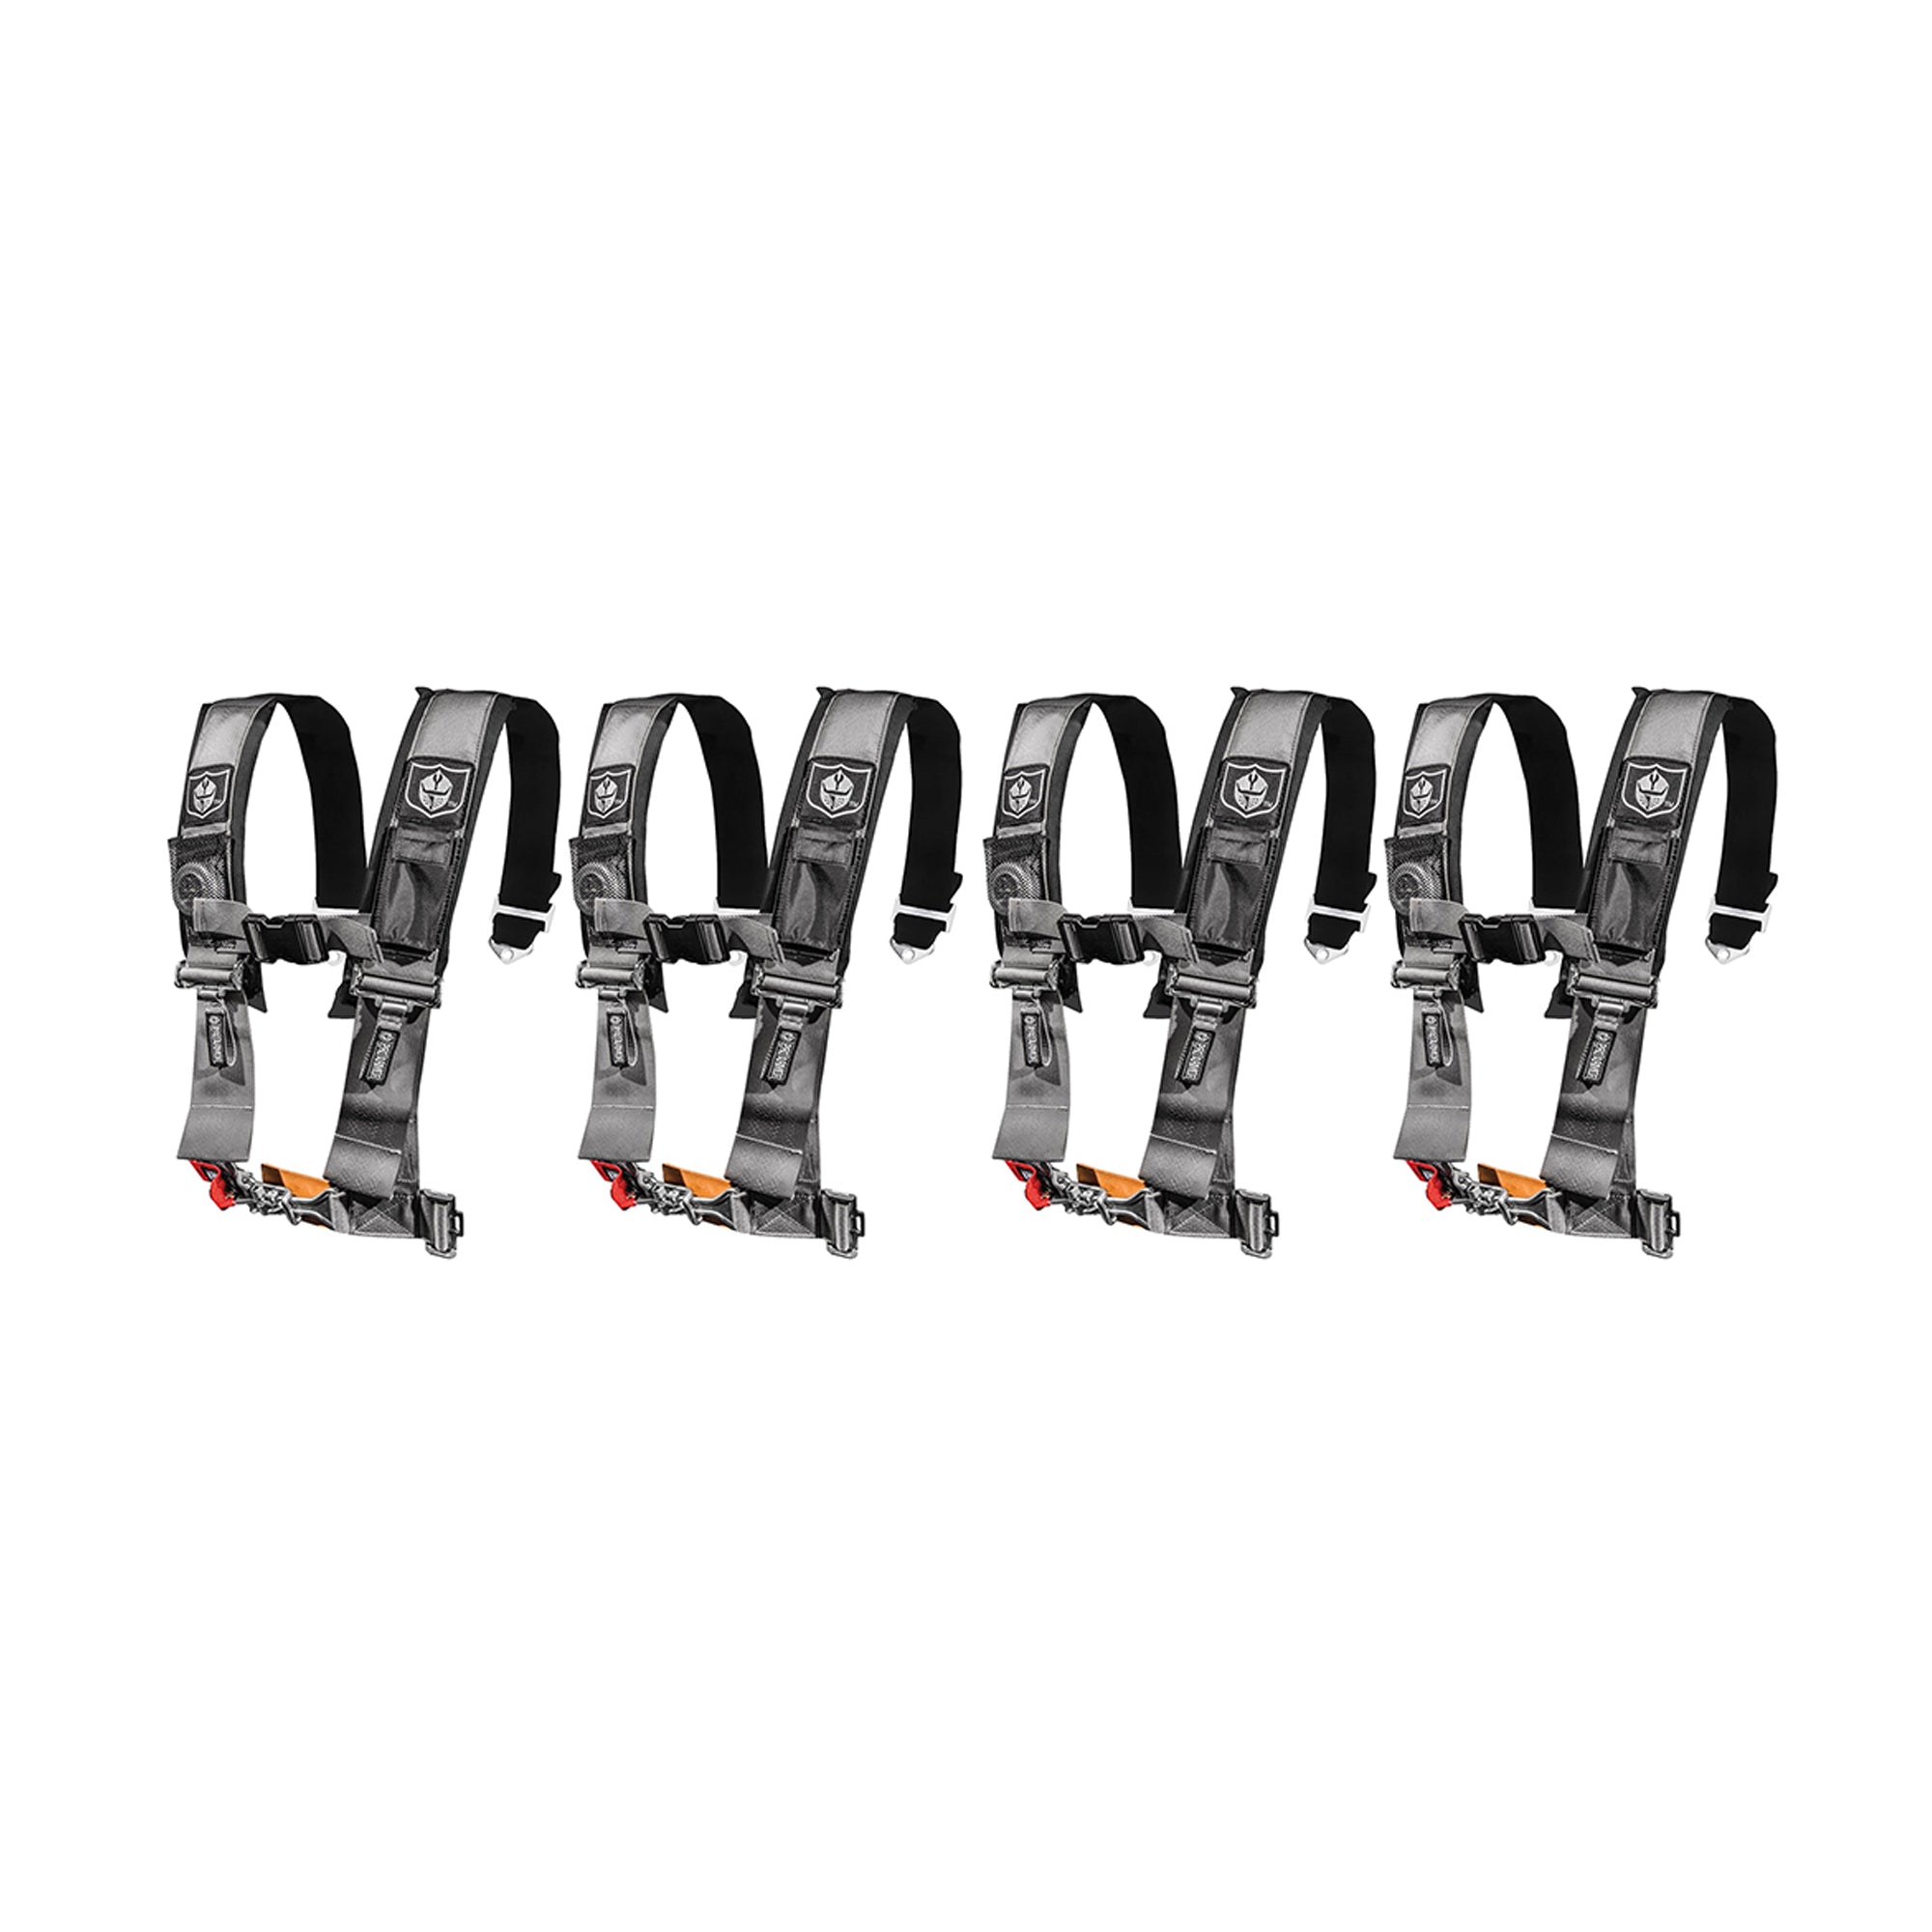 Pro Armor A114230SV Harness 4-Pack